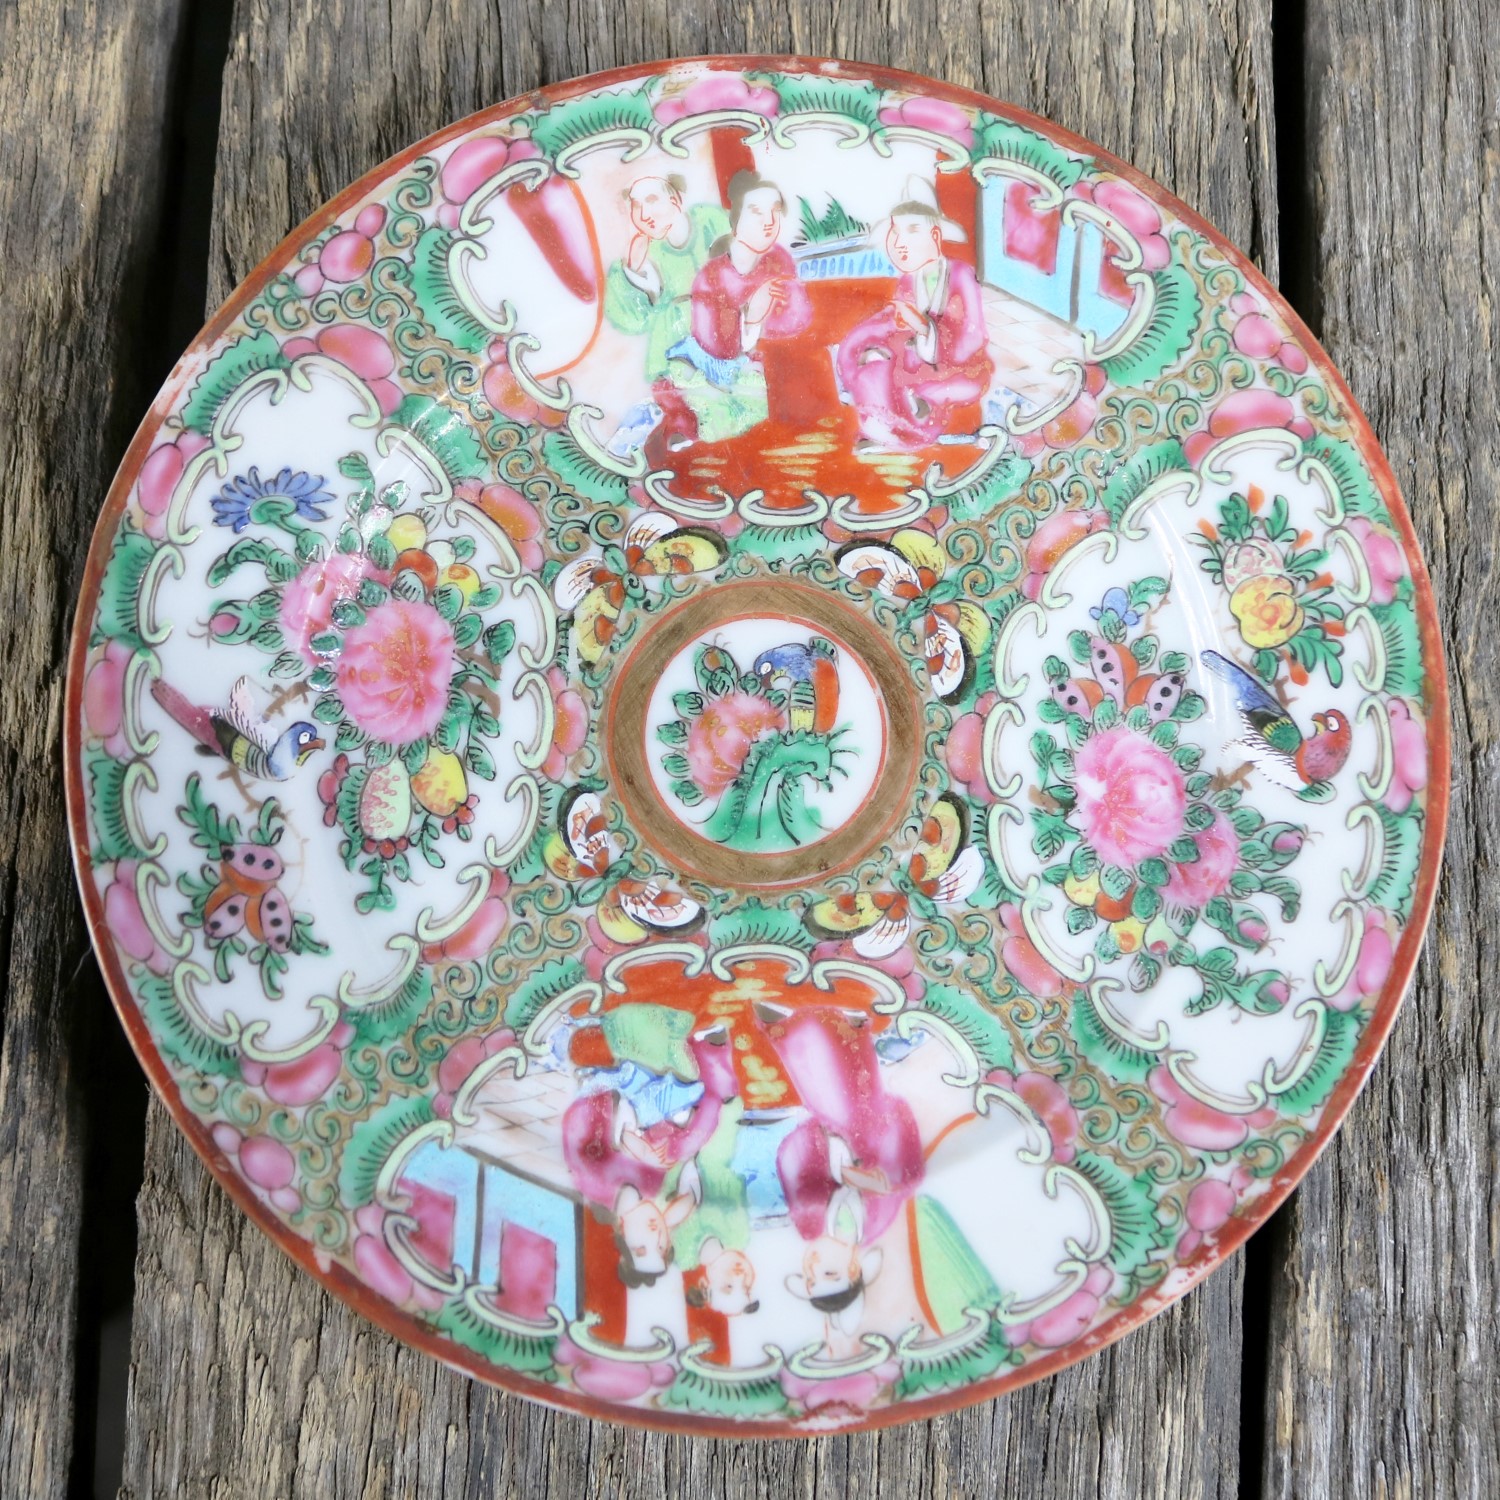 Antique Chinese Qing Rose Medallion Porcelain 6 Inch Plates Set of 4